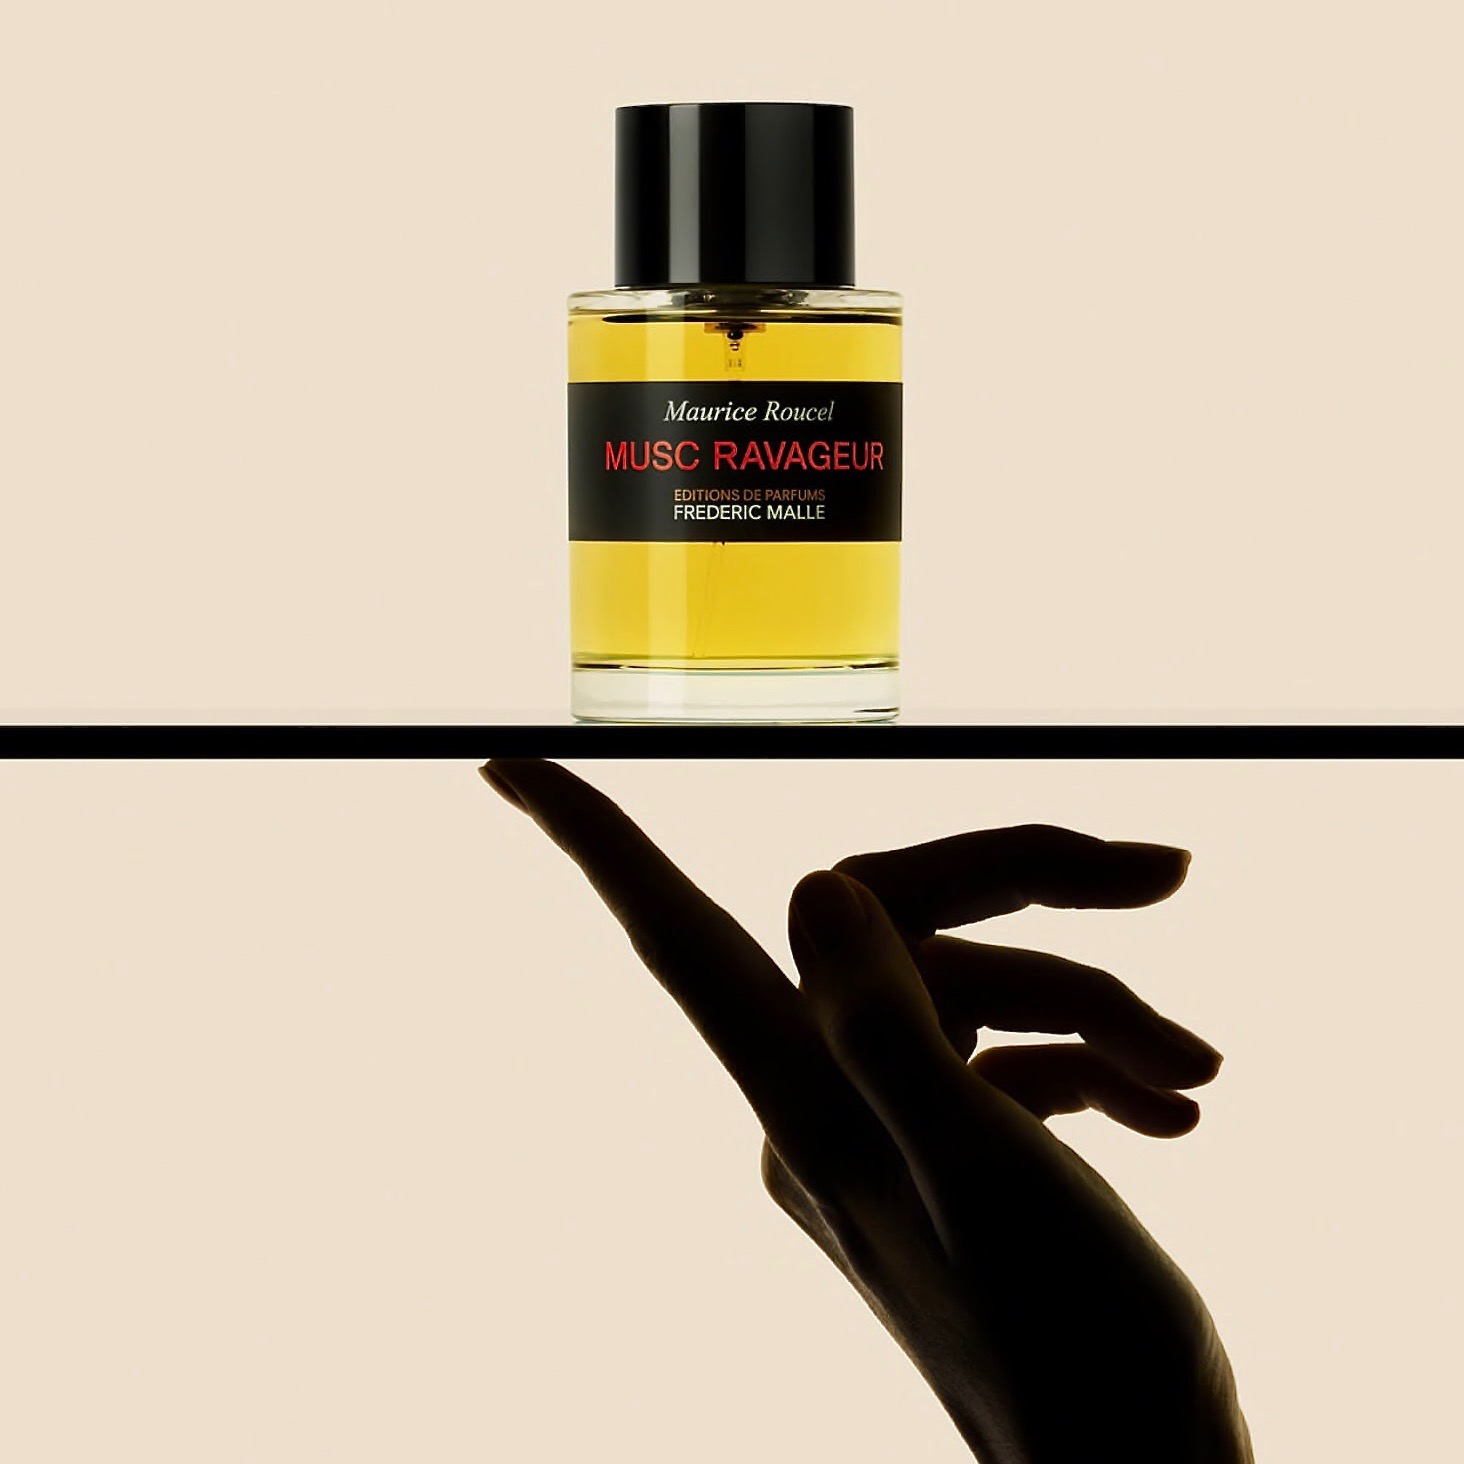 Picture of Frederic Malle's Musc Ravageur perfume, created by Maurice Roucel